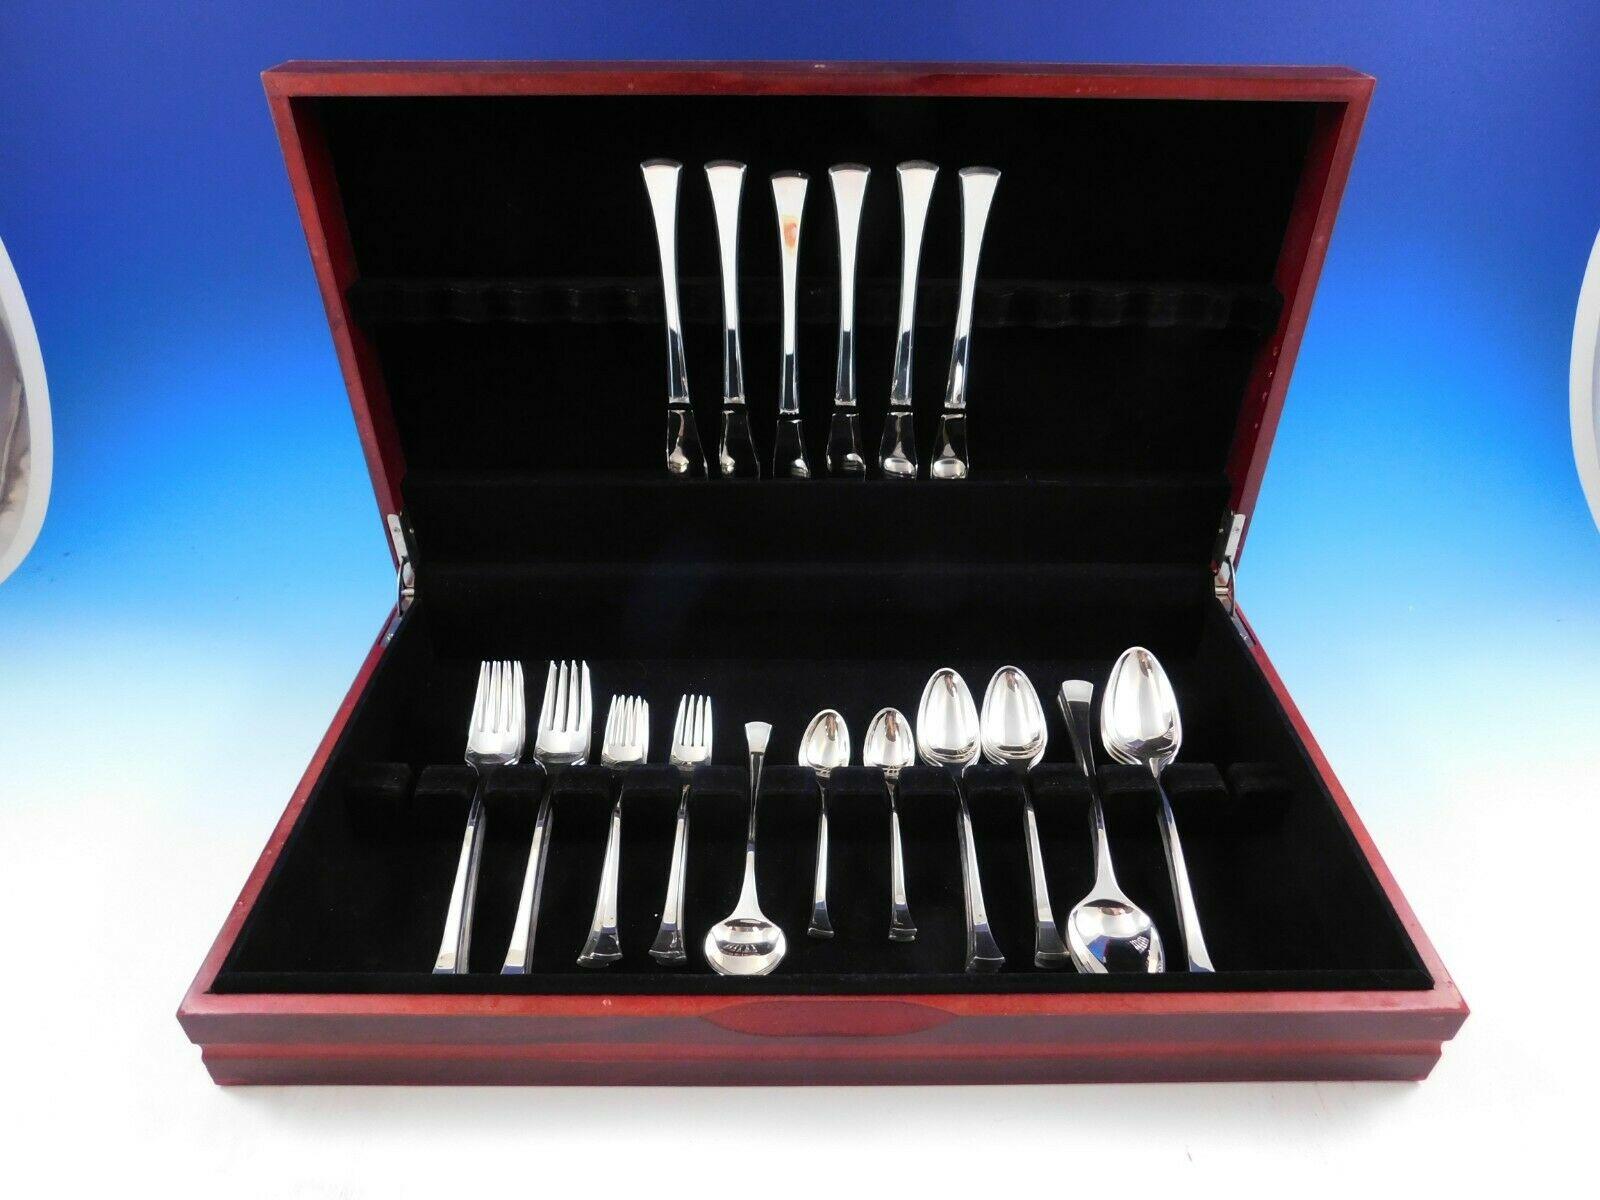 Mid-Century Modern Kristine by Hans Hansen Danish sterling silver Flatware set, 37 pieces. This set includes:

6 Dinner Knives, long handle, 8 5/8